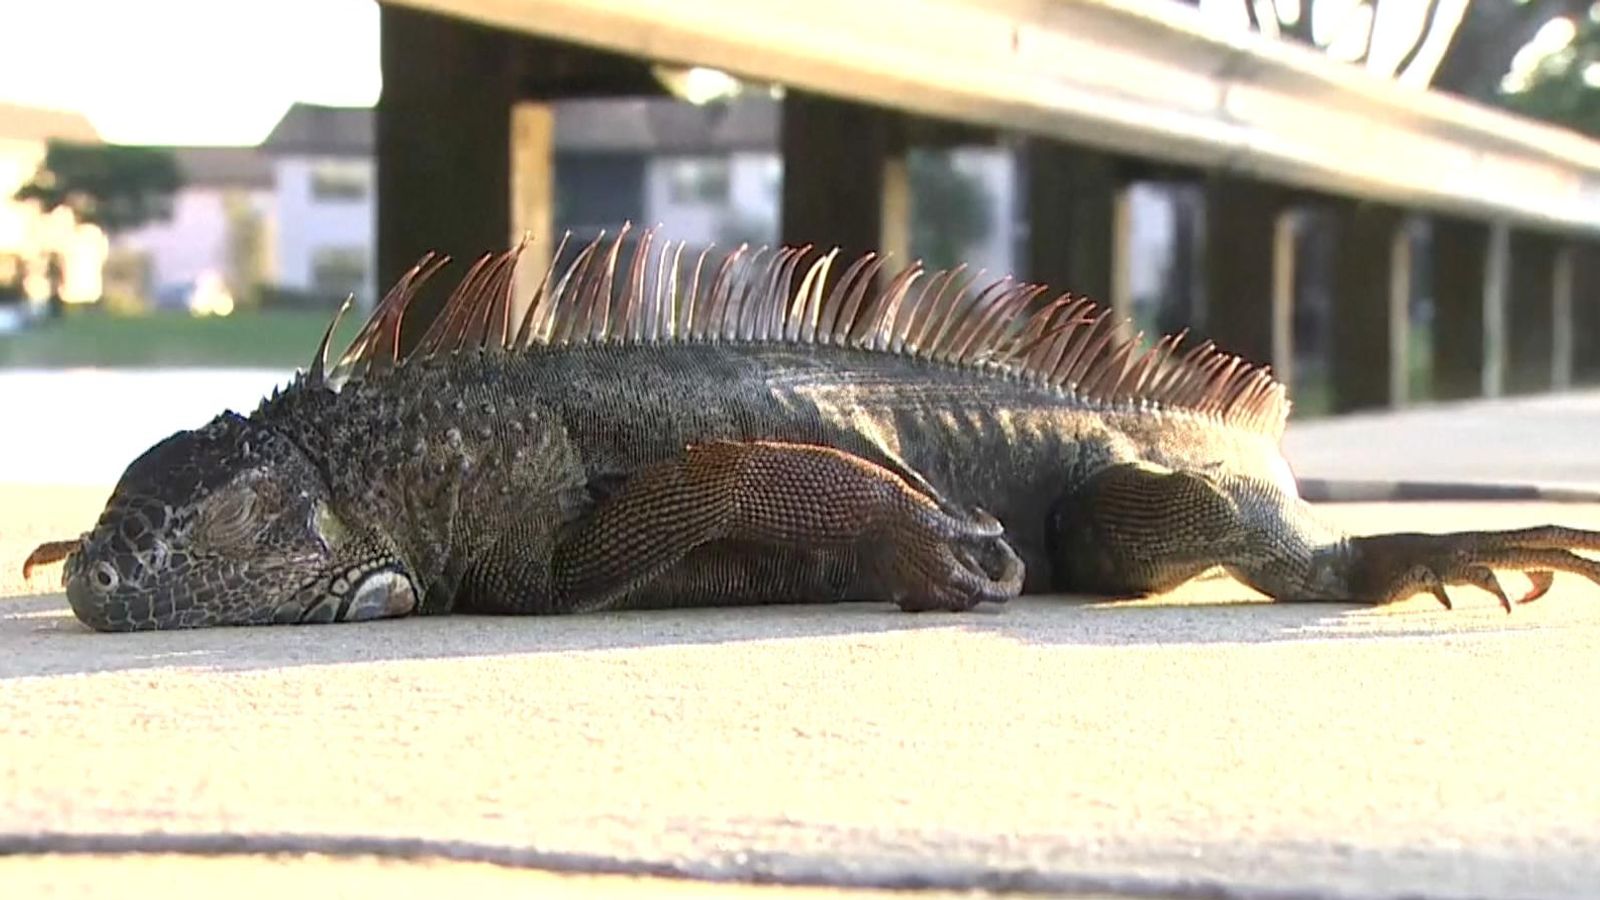 Frozen iguanas fall from trees as temperatures drop in Florida | US News | Sky News1600 x 900